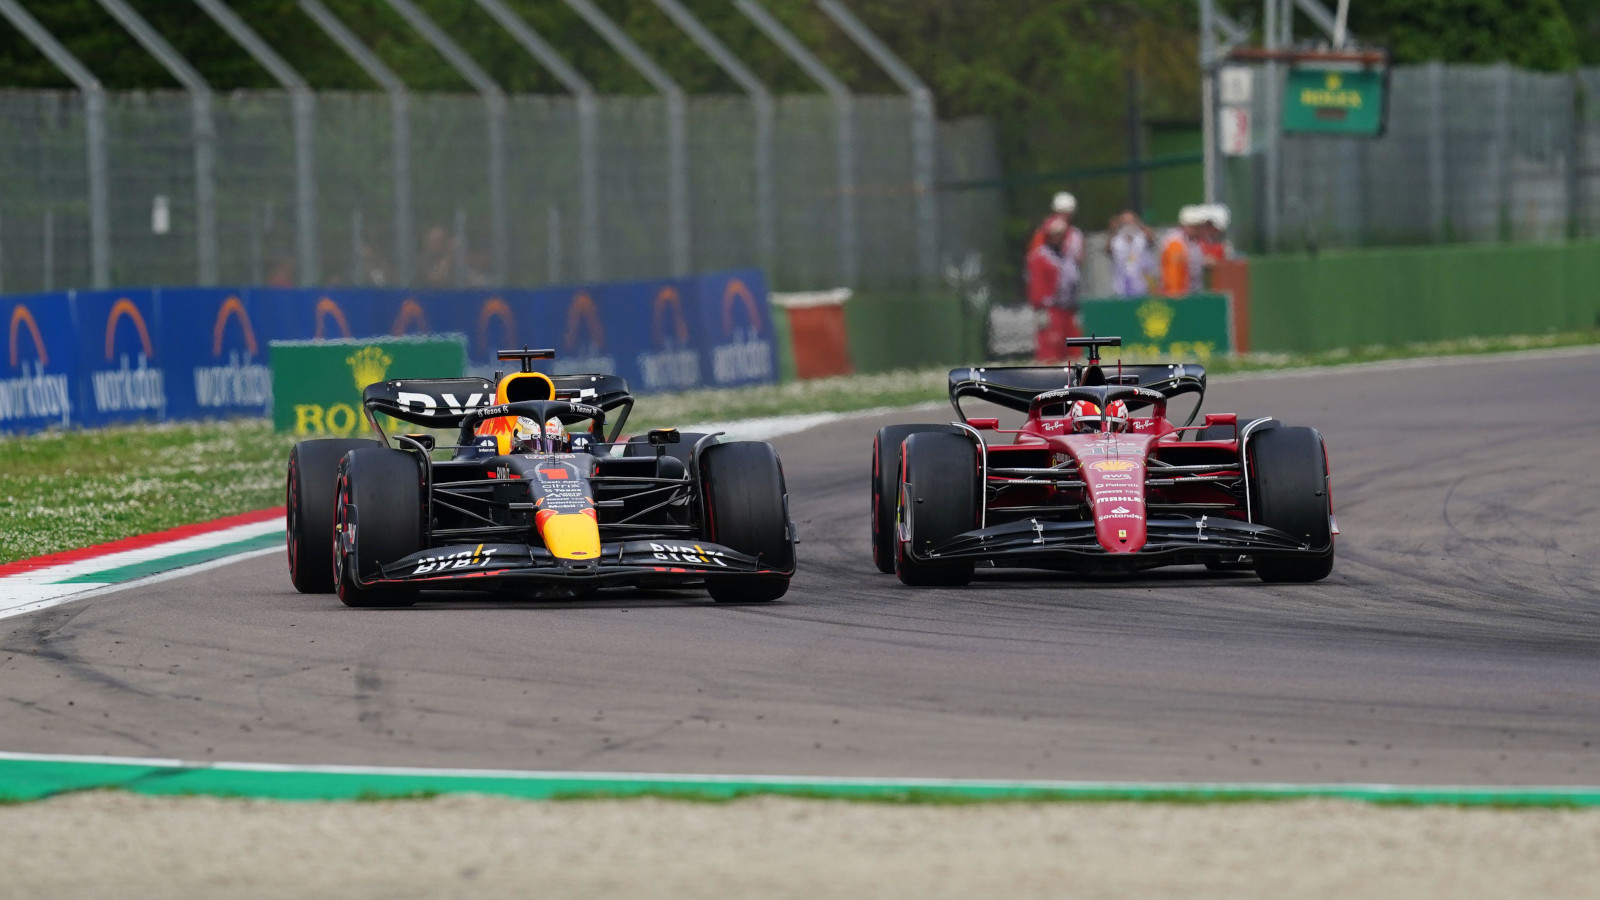 Max Verstappen side by side with Charles Leclerc for the lead. Imola April 2022